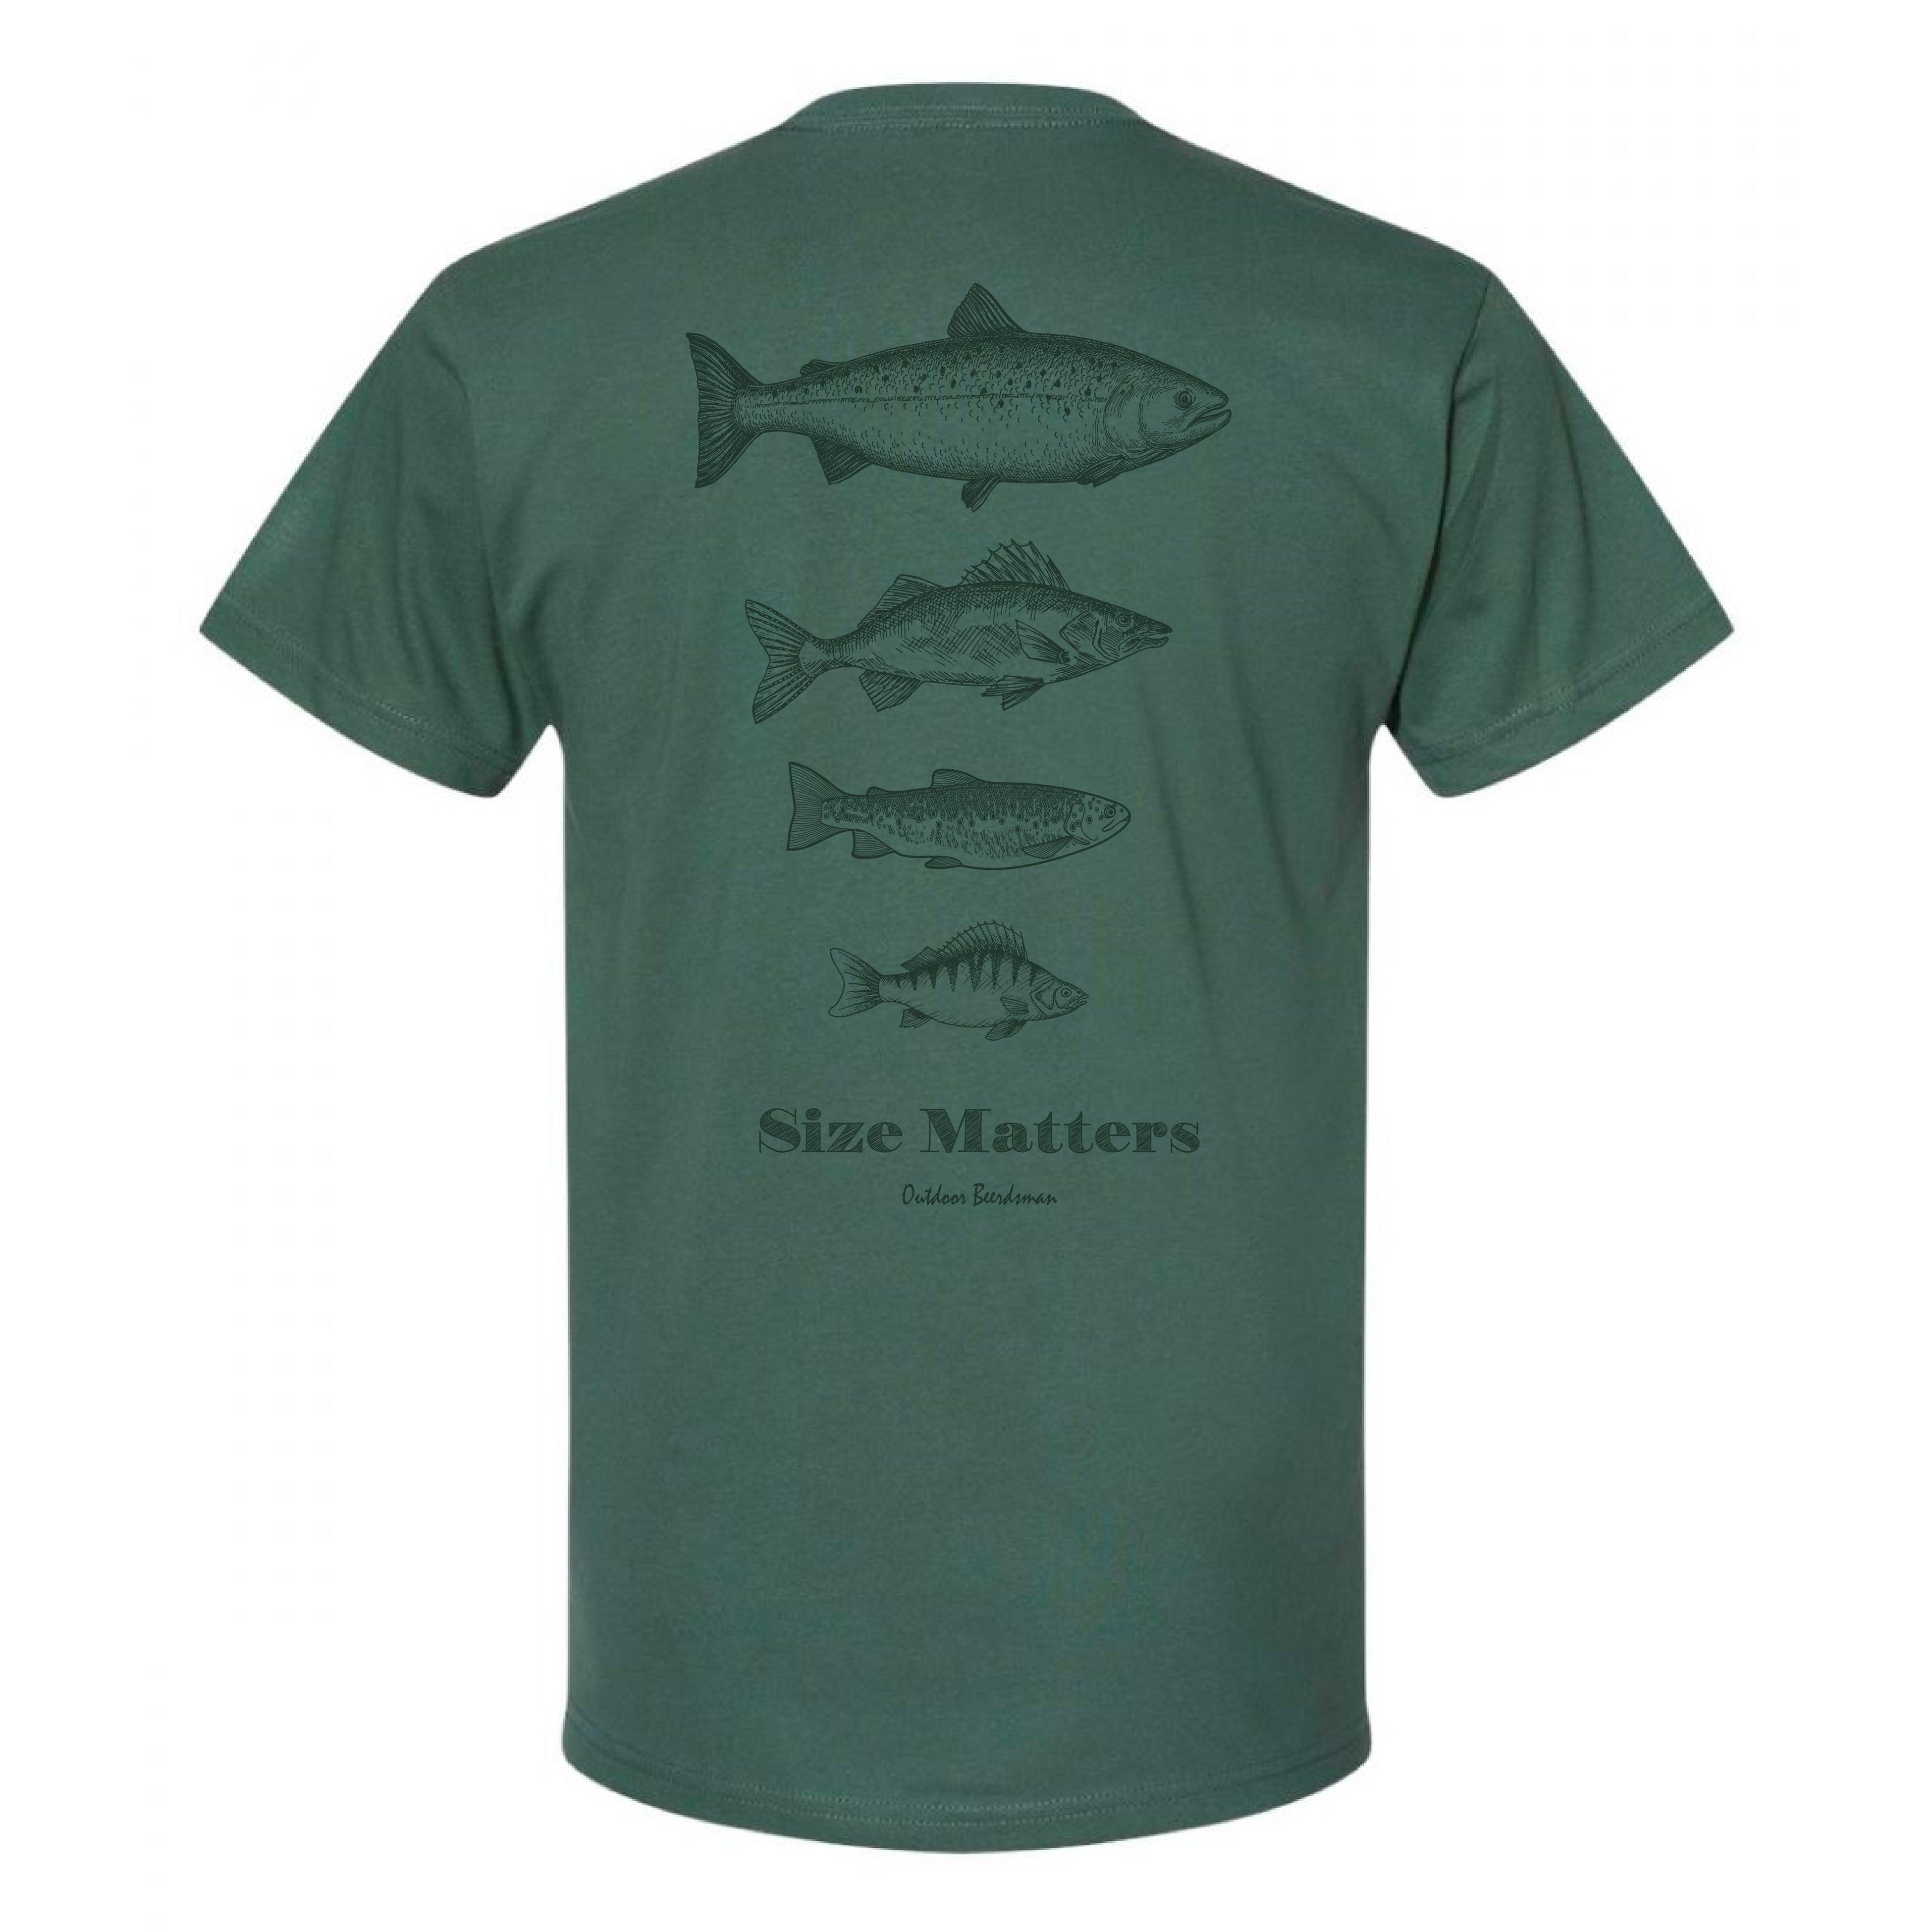 Size Matters T-Shirt - Ales to Trails